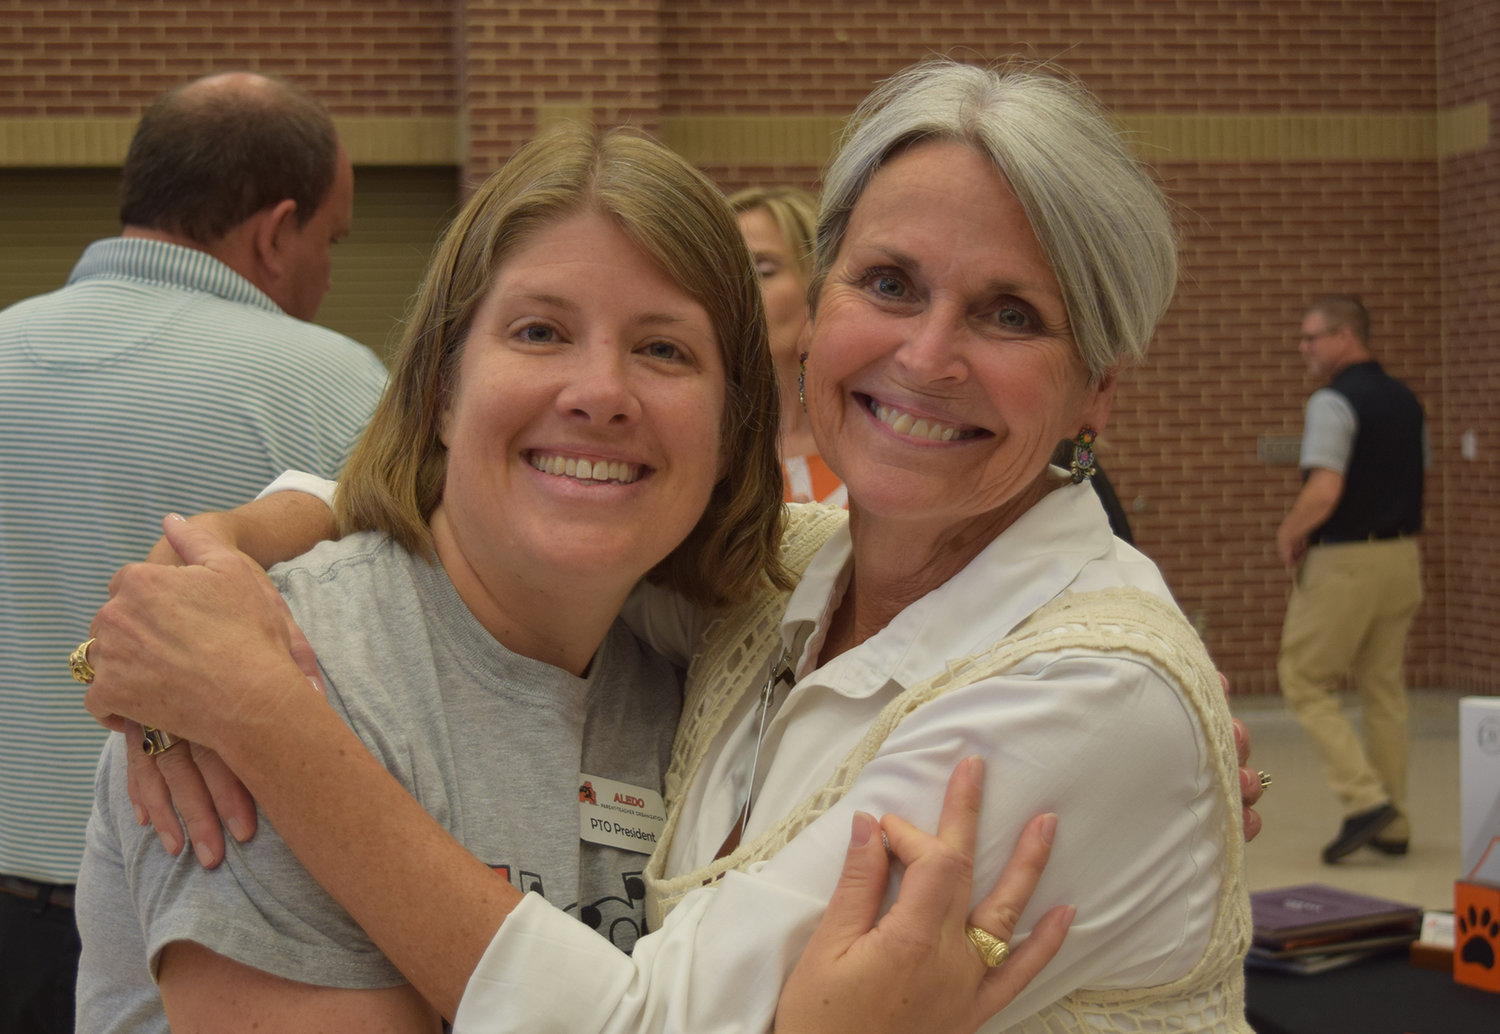 Aledo Class of 1995 alum Candace Lear with Deputy Superintendent Lynn McKinney at Bearcat Nation 101 in 2019. McKinney was high school principal during Lear's years at AHS.